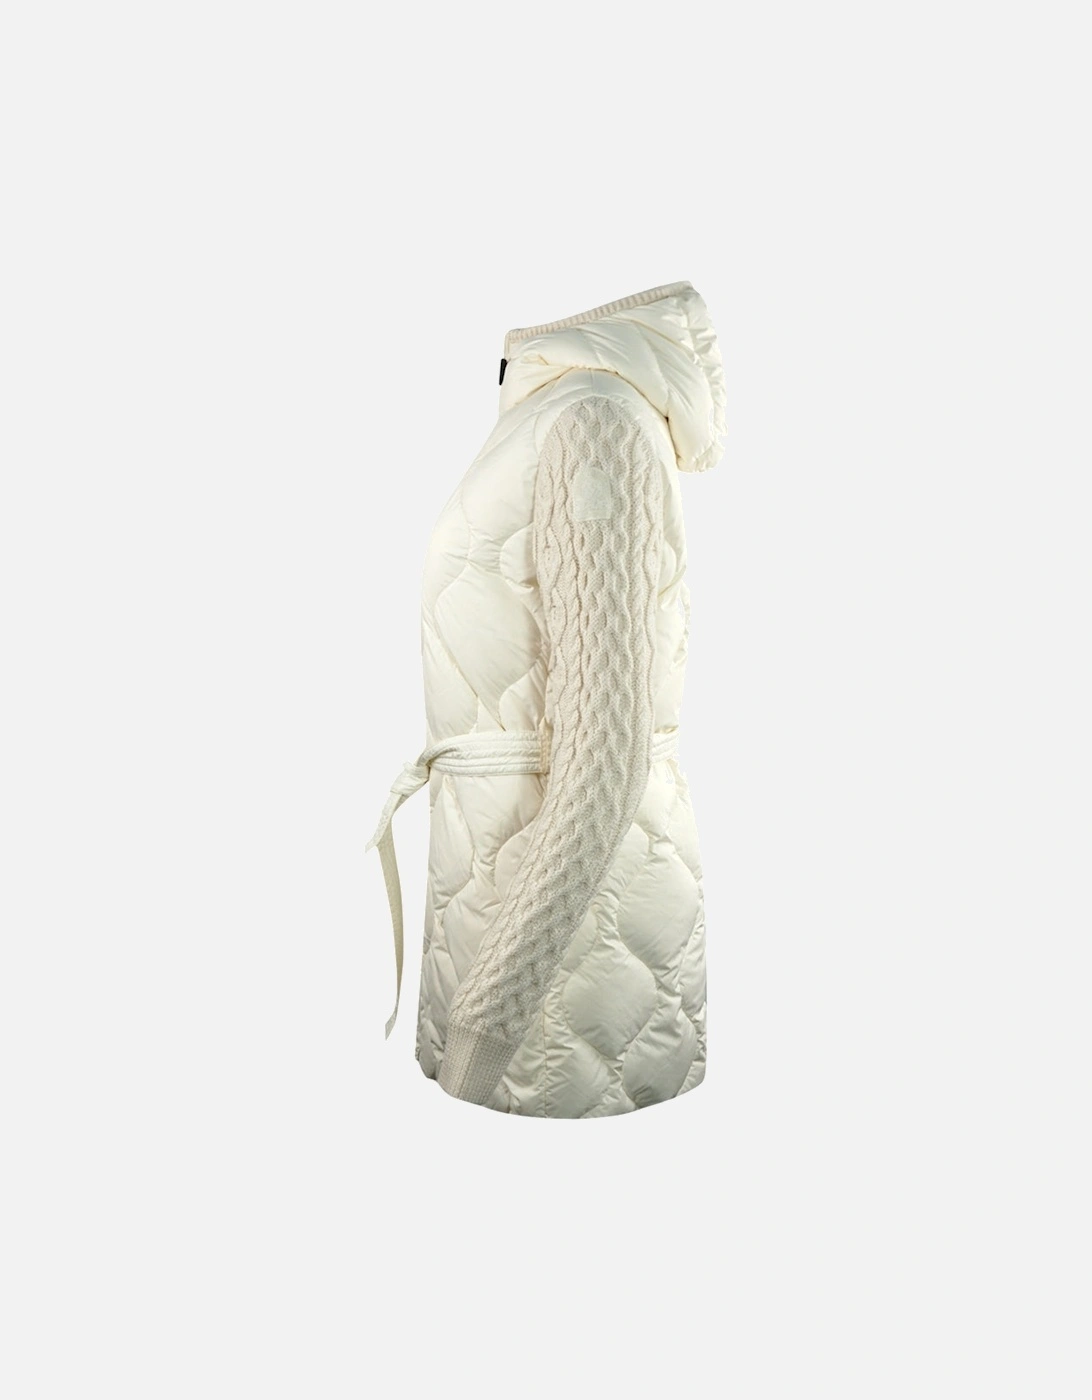 Lady Purity Cream Down Jacket